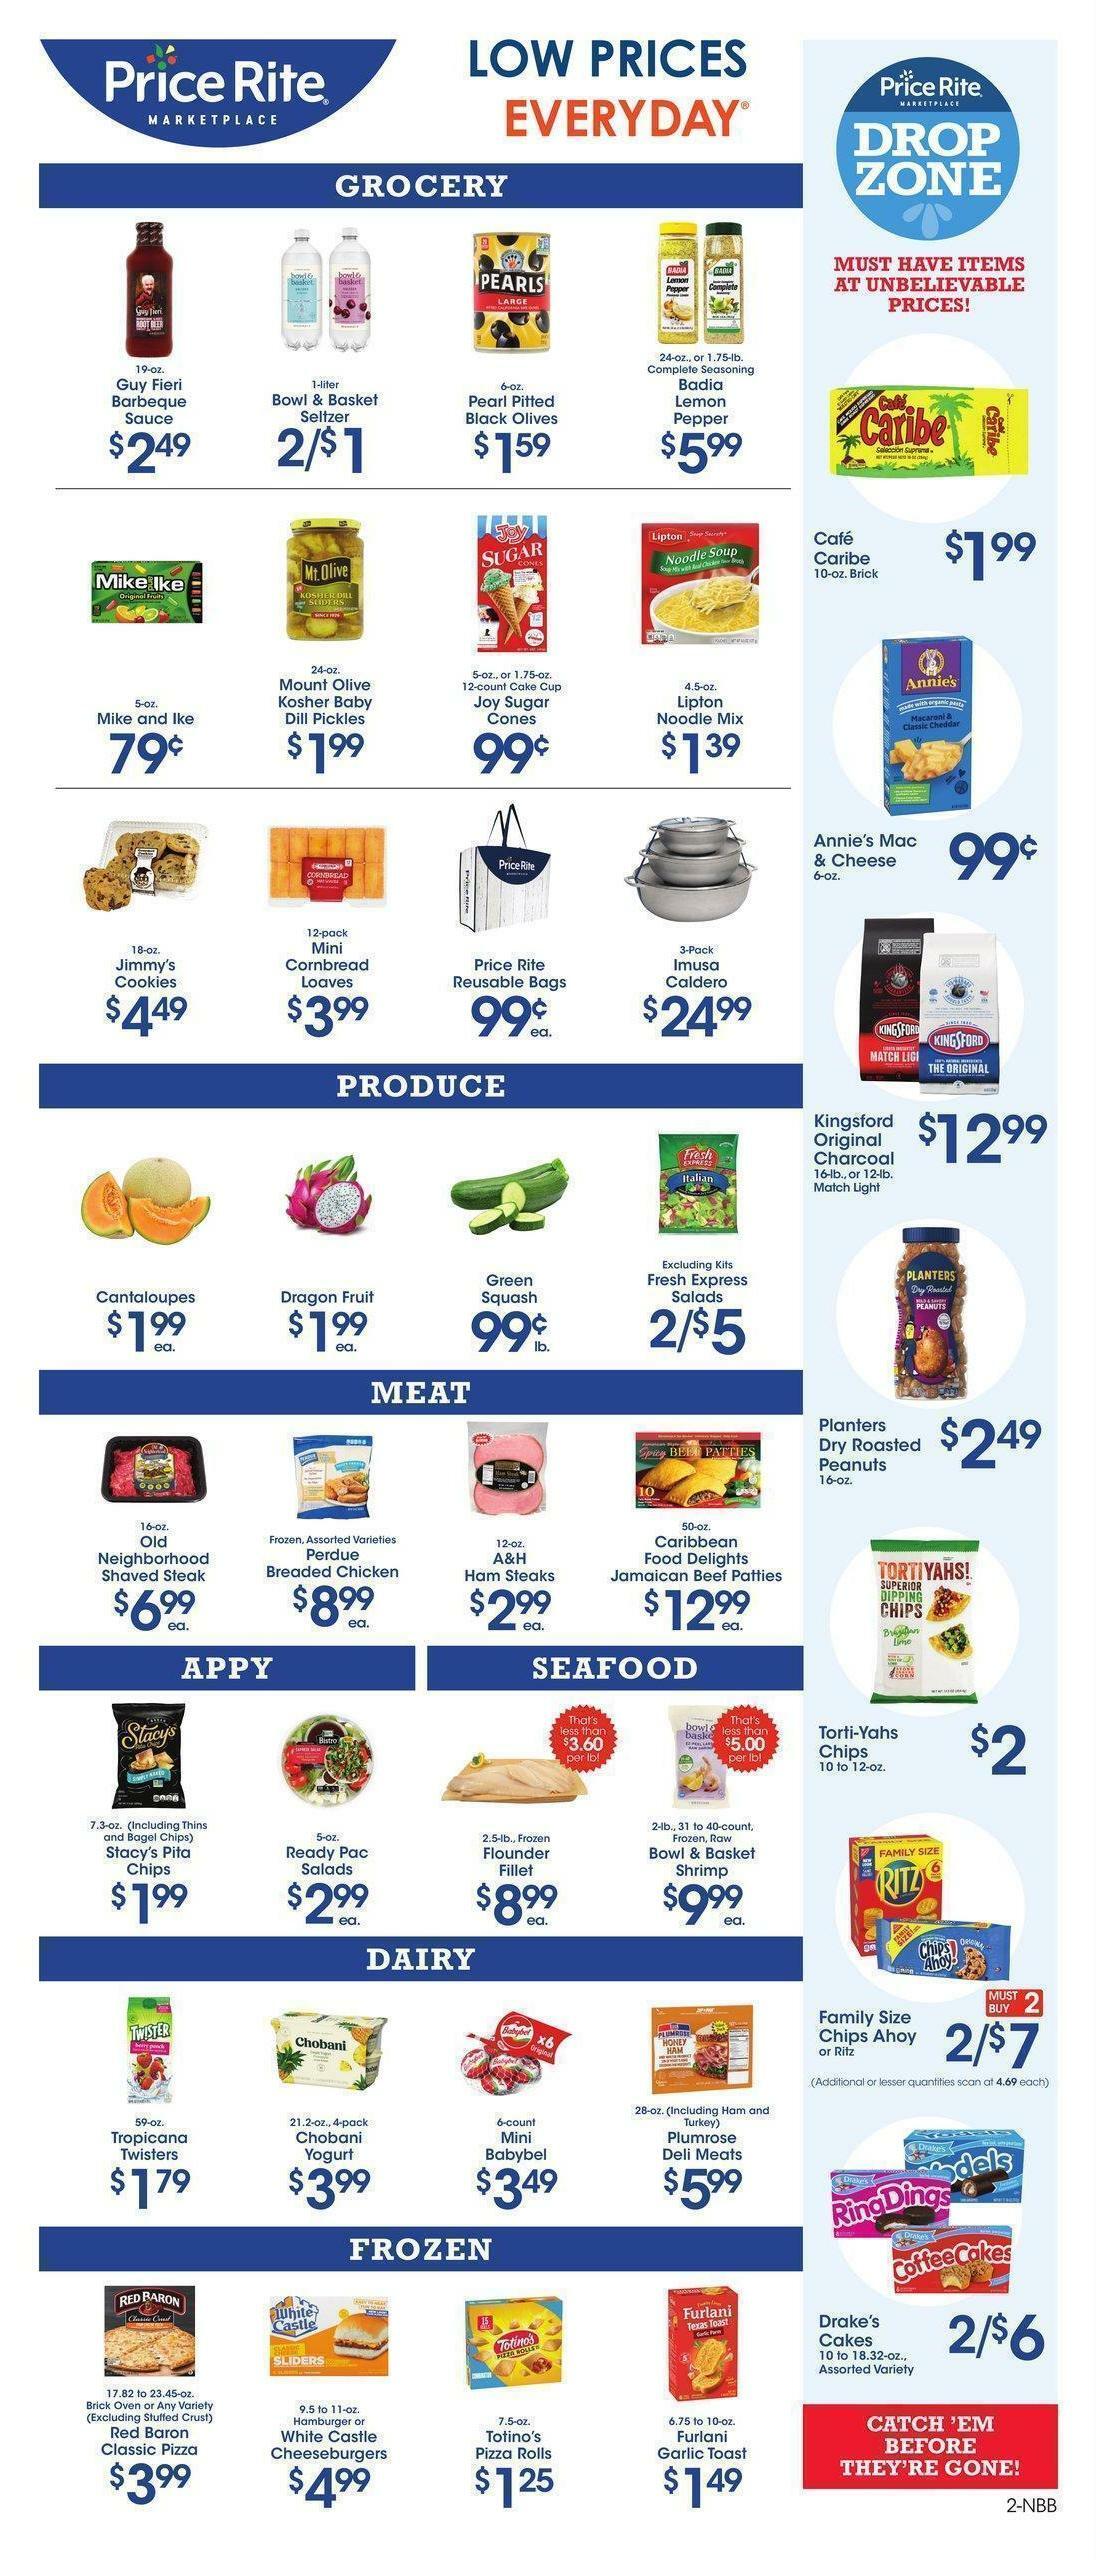 Price Rite Weekly Ad from March 17